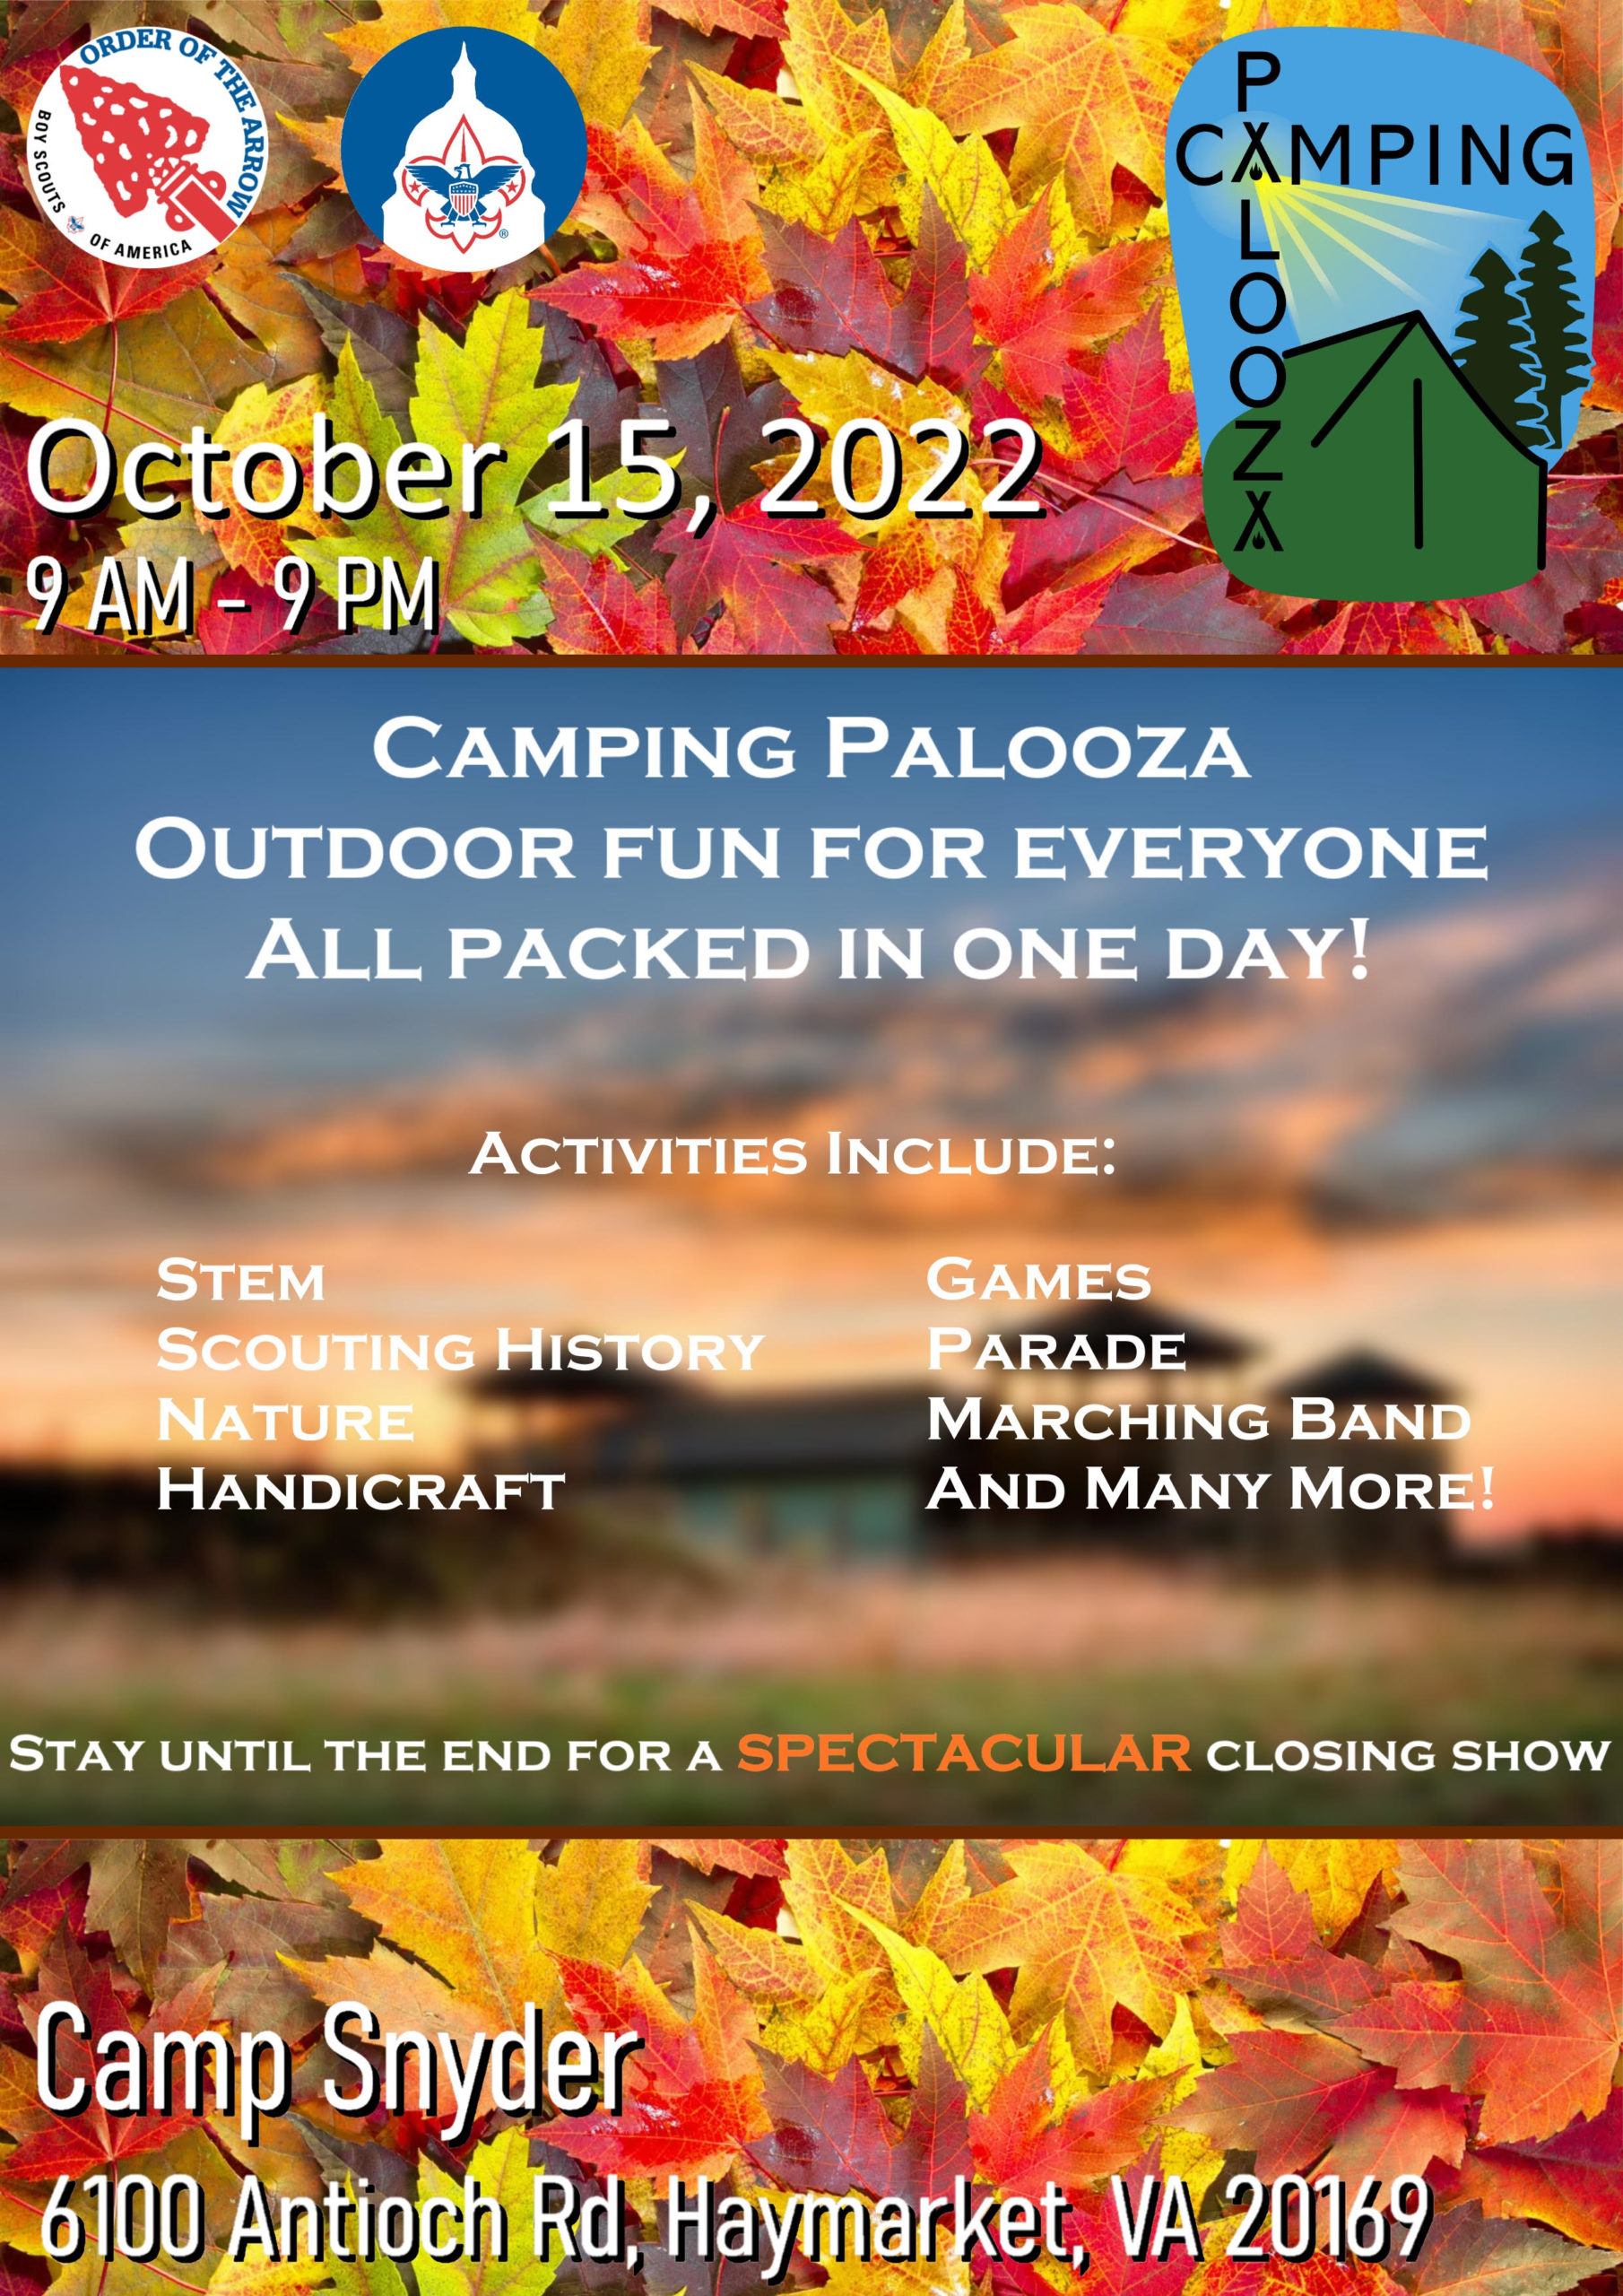 Camping Palooza is for All Scouts! We Own Adventure